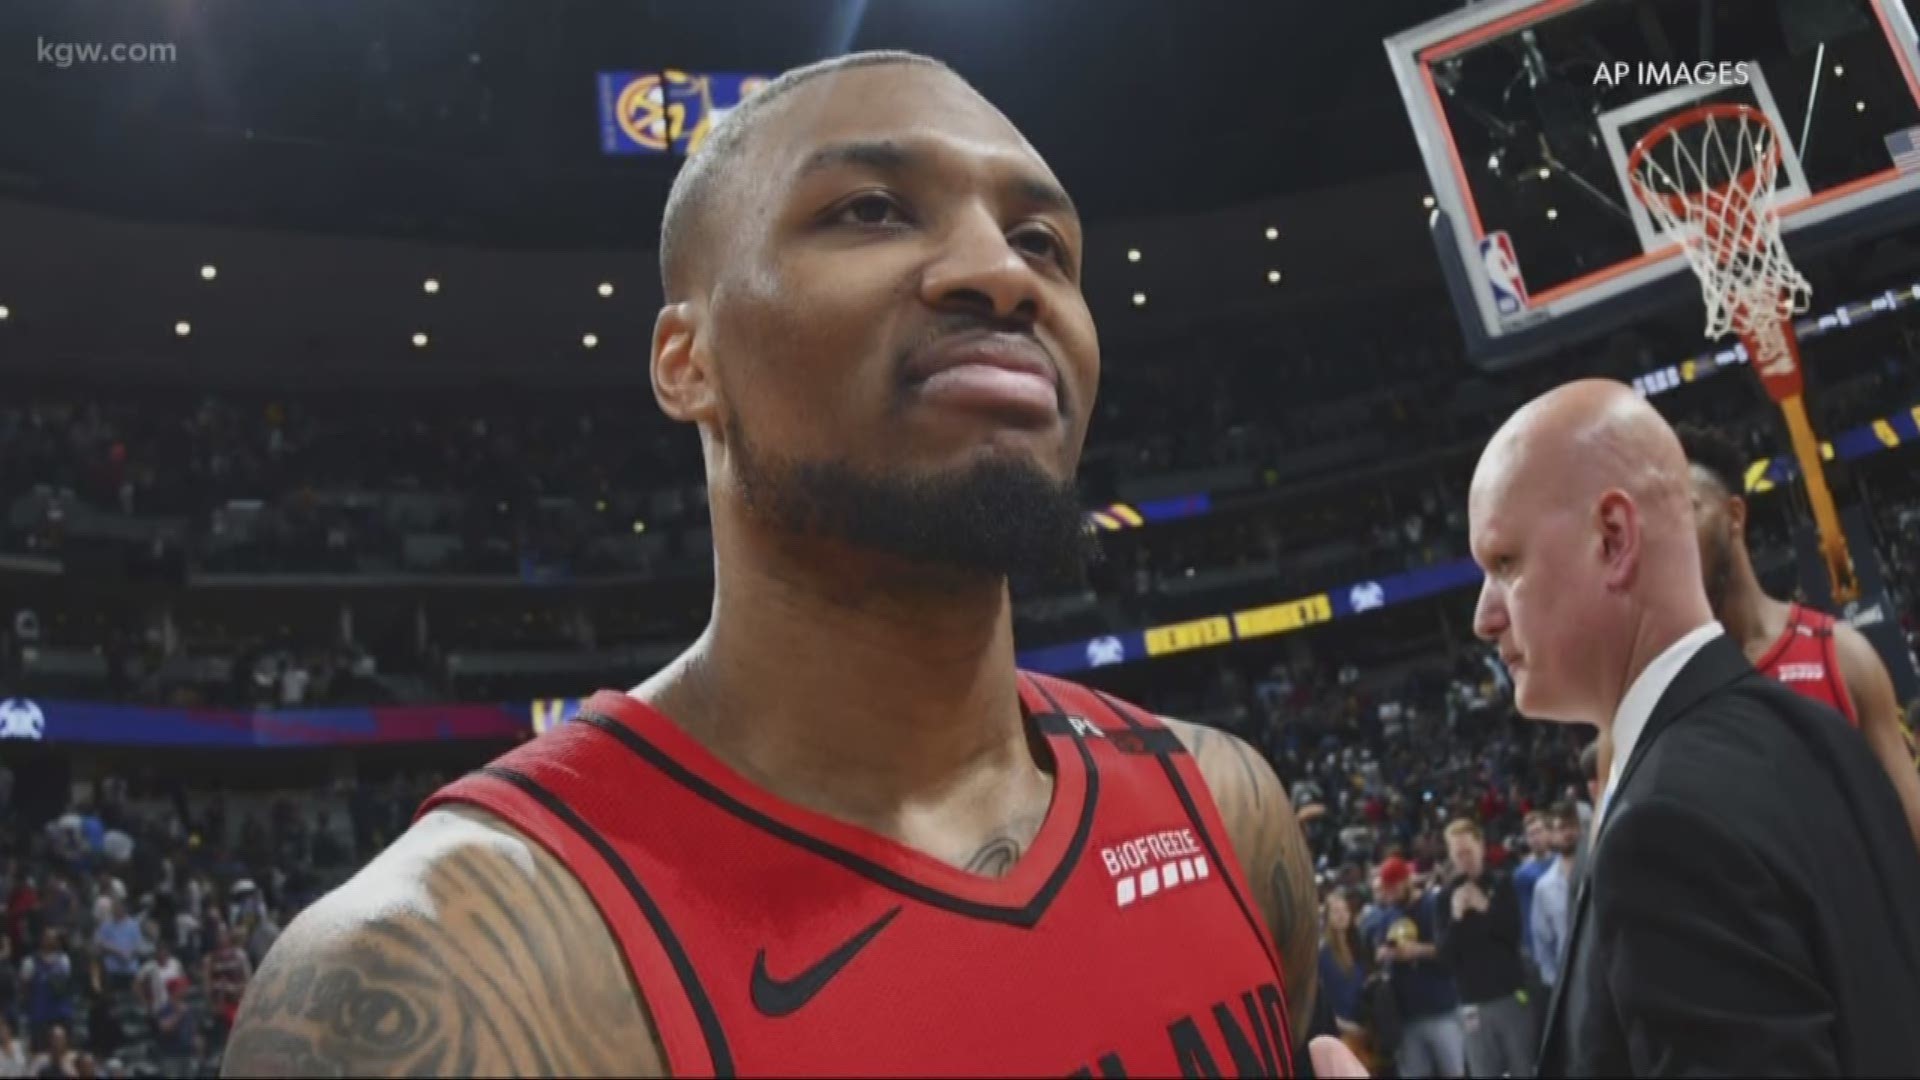 "You see that everybody's excited because we all play a part in it. ... It takes everybody to be all in," Blazers superstar Damian Lillard said after the Blazers' 100-96 win in Game 7 against the Denver Nuggets to advance to the Western Conference finals.